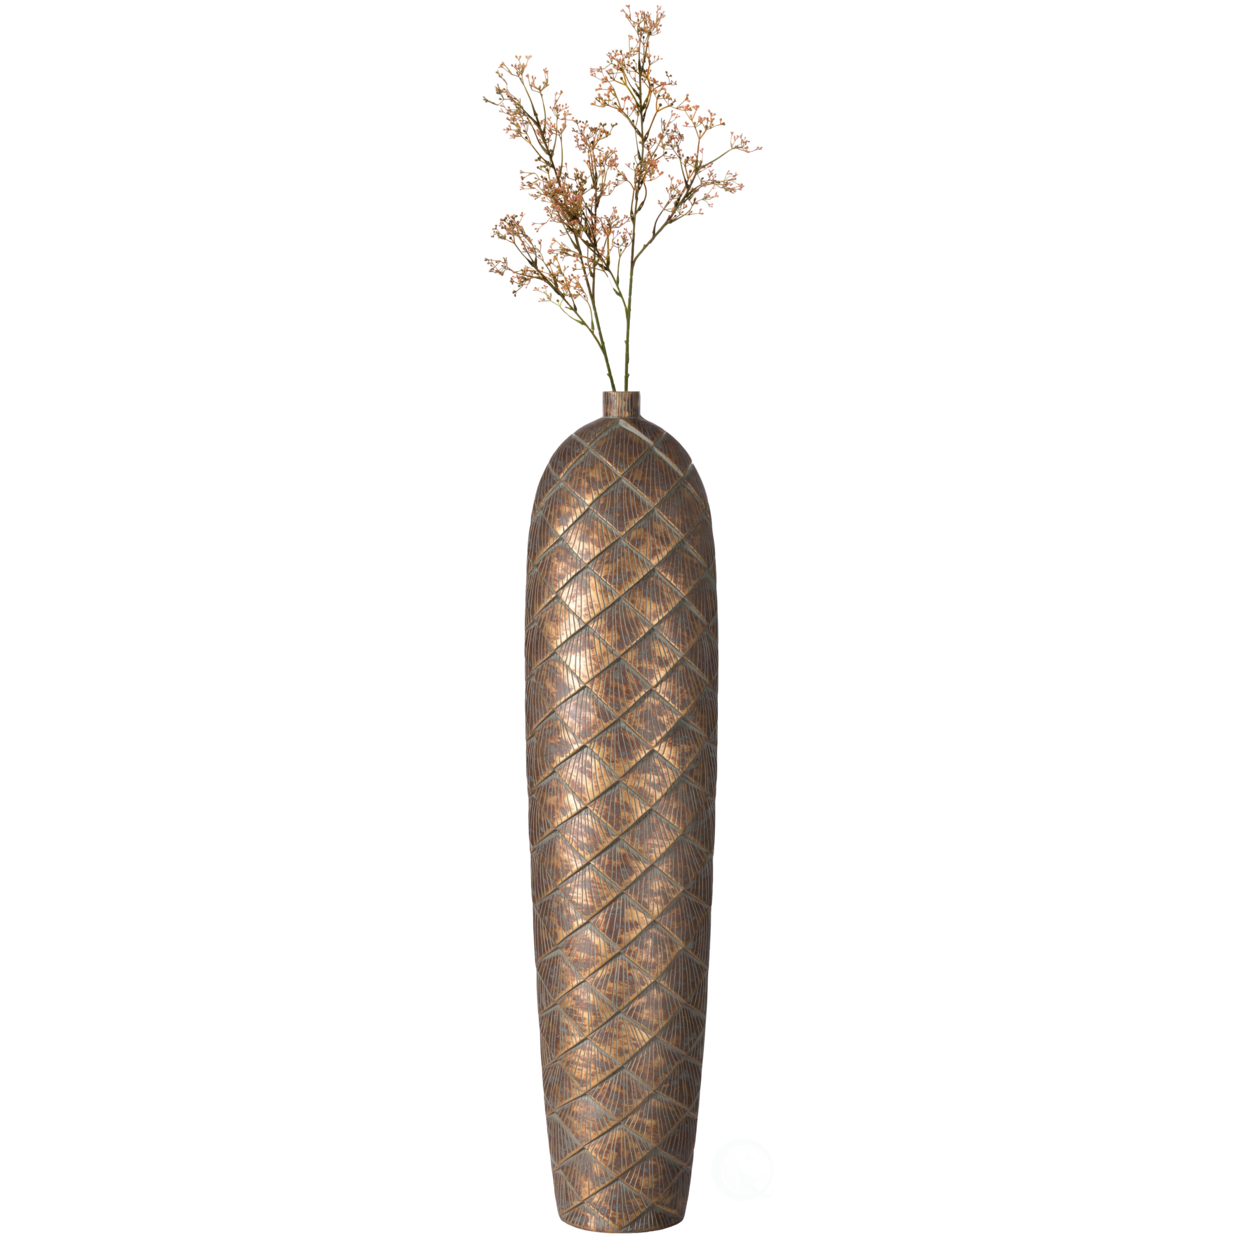 Tall Cylinder Antique Style Designed Floor Vase For Entryway Dining Or Living Room, Ceramic Rustic